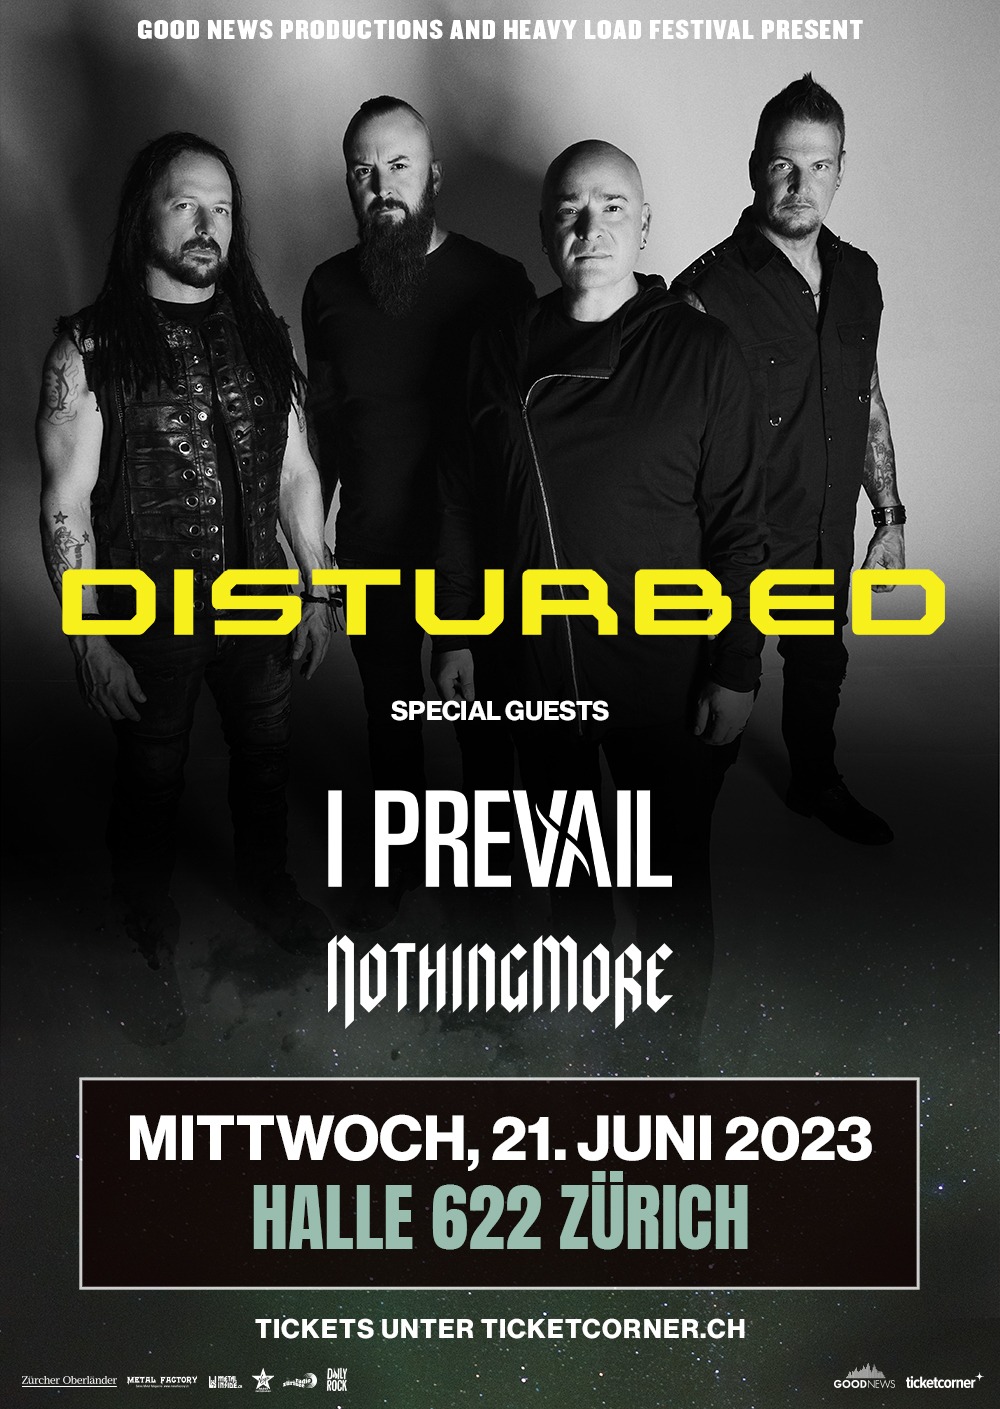 Disturbed's at Heavy Load Festival in Switzerland